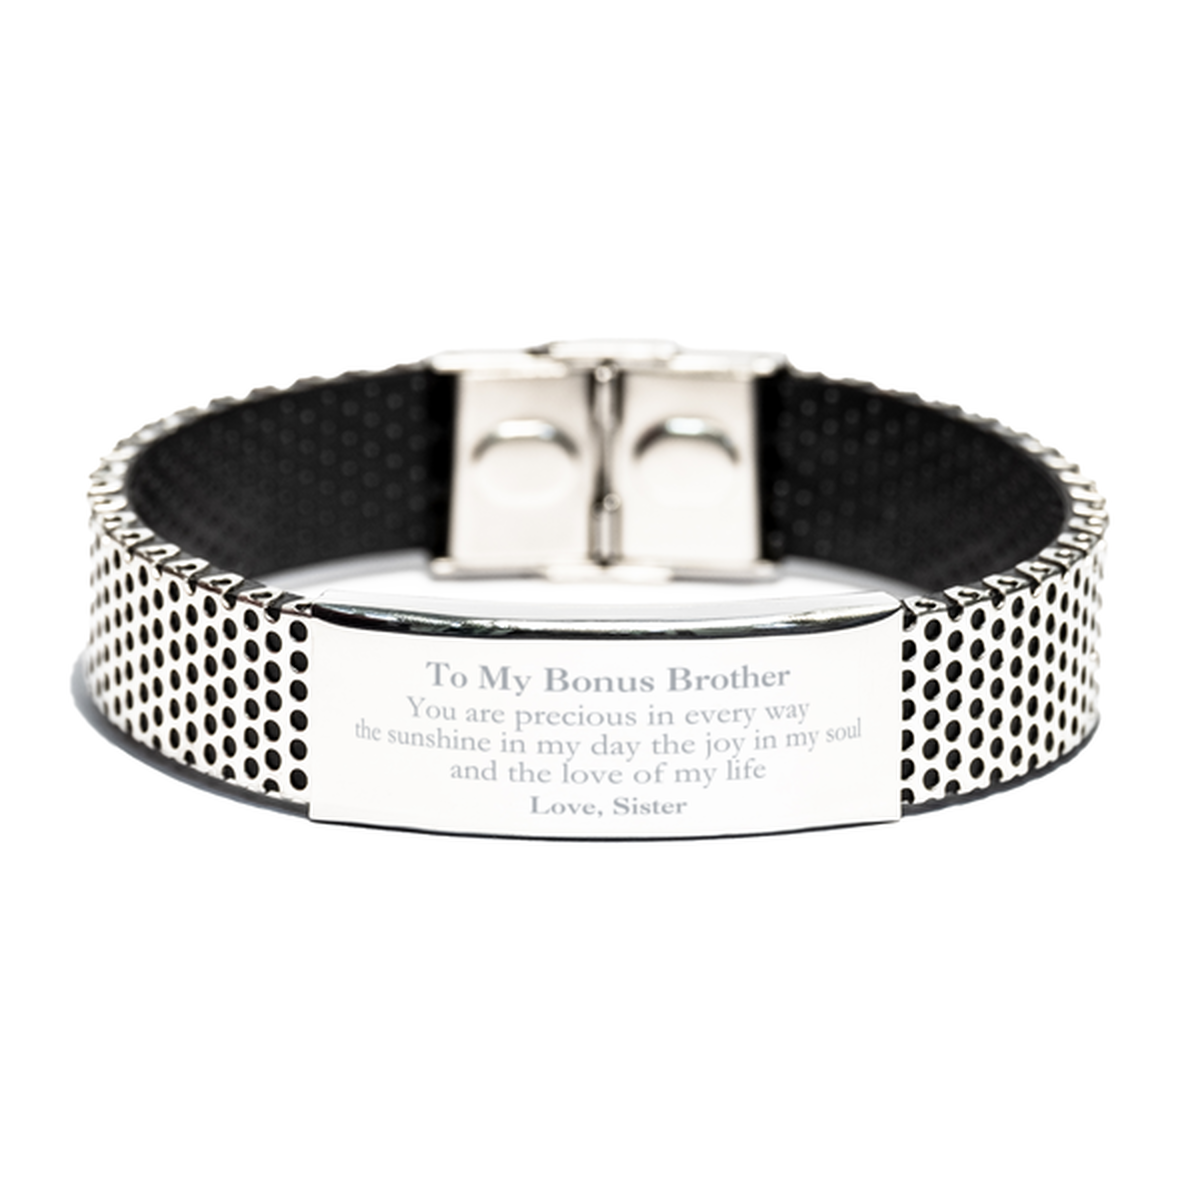 Graduation Gifts for Bonus Brother Stainless Steel Bracelet Present from Sister, Christmas Bonus Brother Birthday Gifts Bonus Brother You are precious in every way the sunshine in my day. Love, Sister